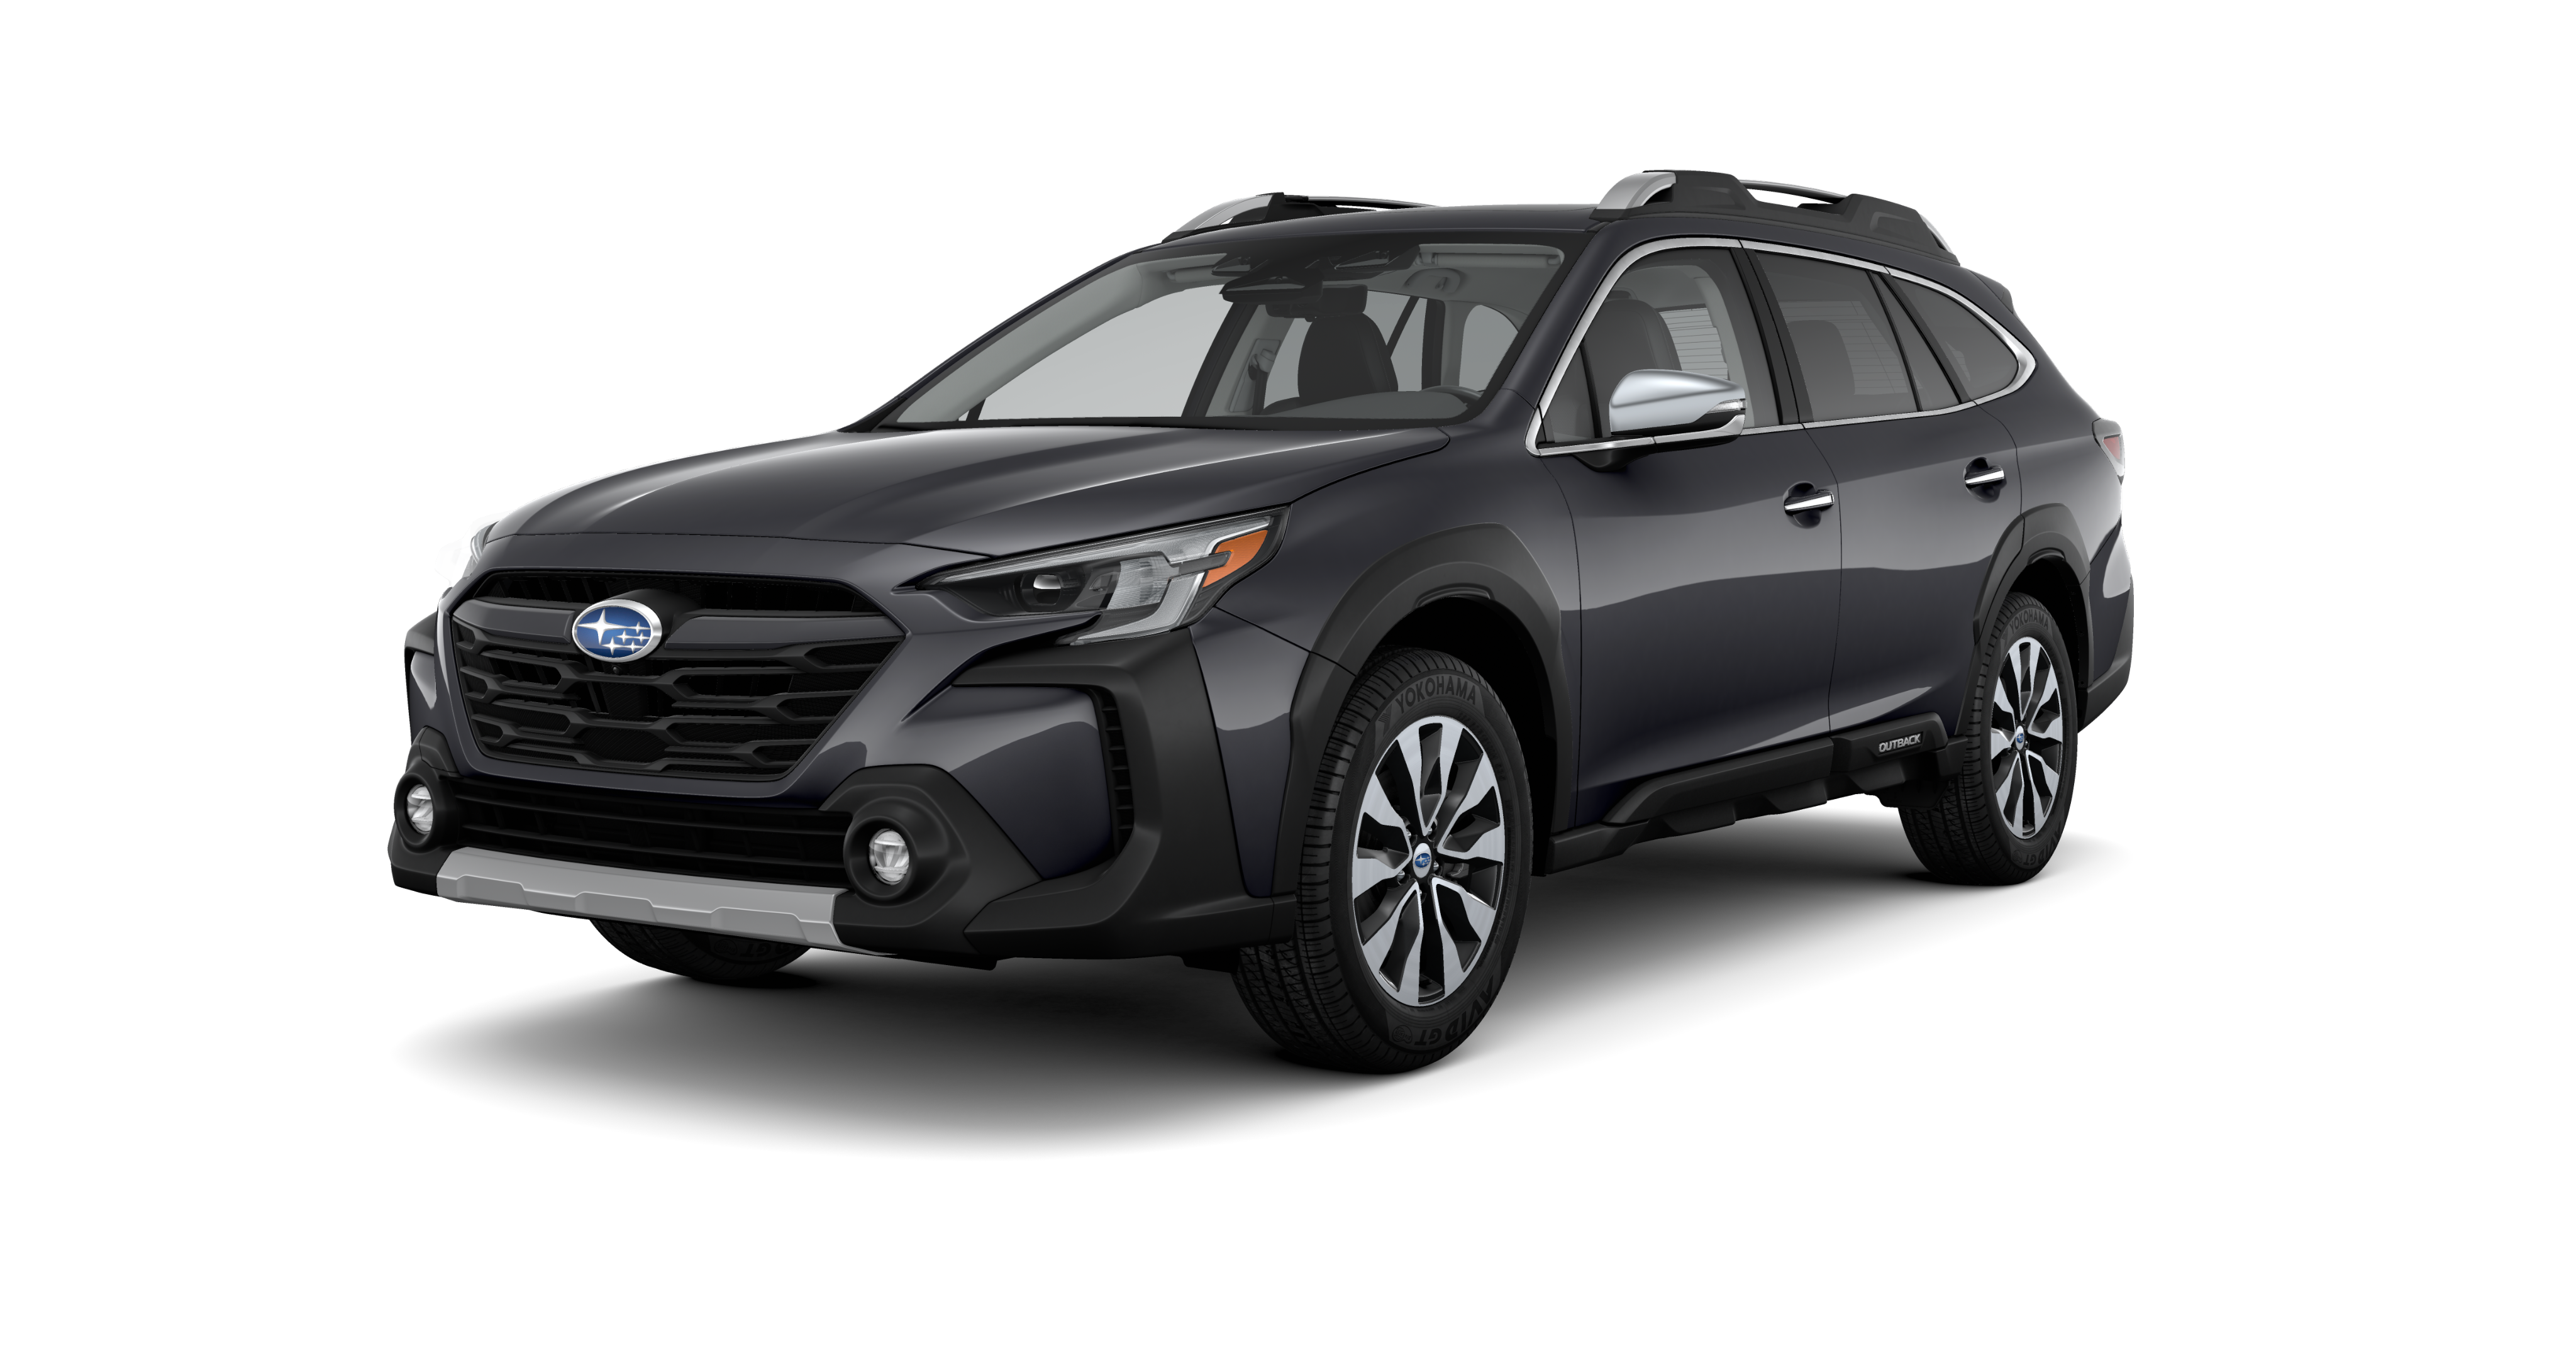 The 2023 Outback Touring